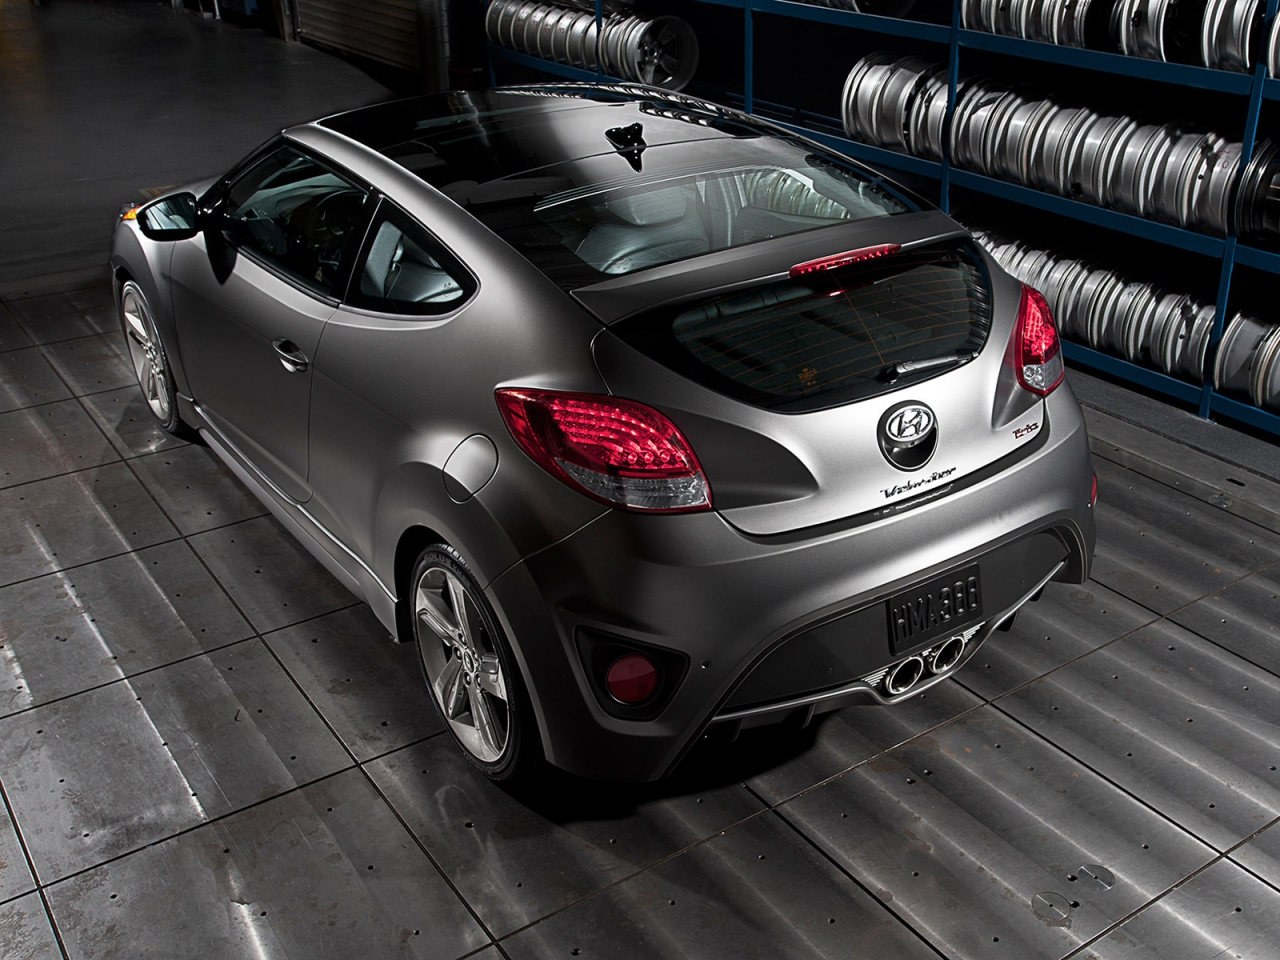 Hyundai Veloster Turbo 2013 Edition for 1280 x 960 resolution